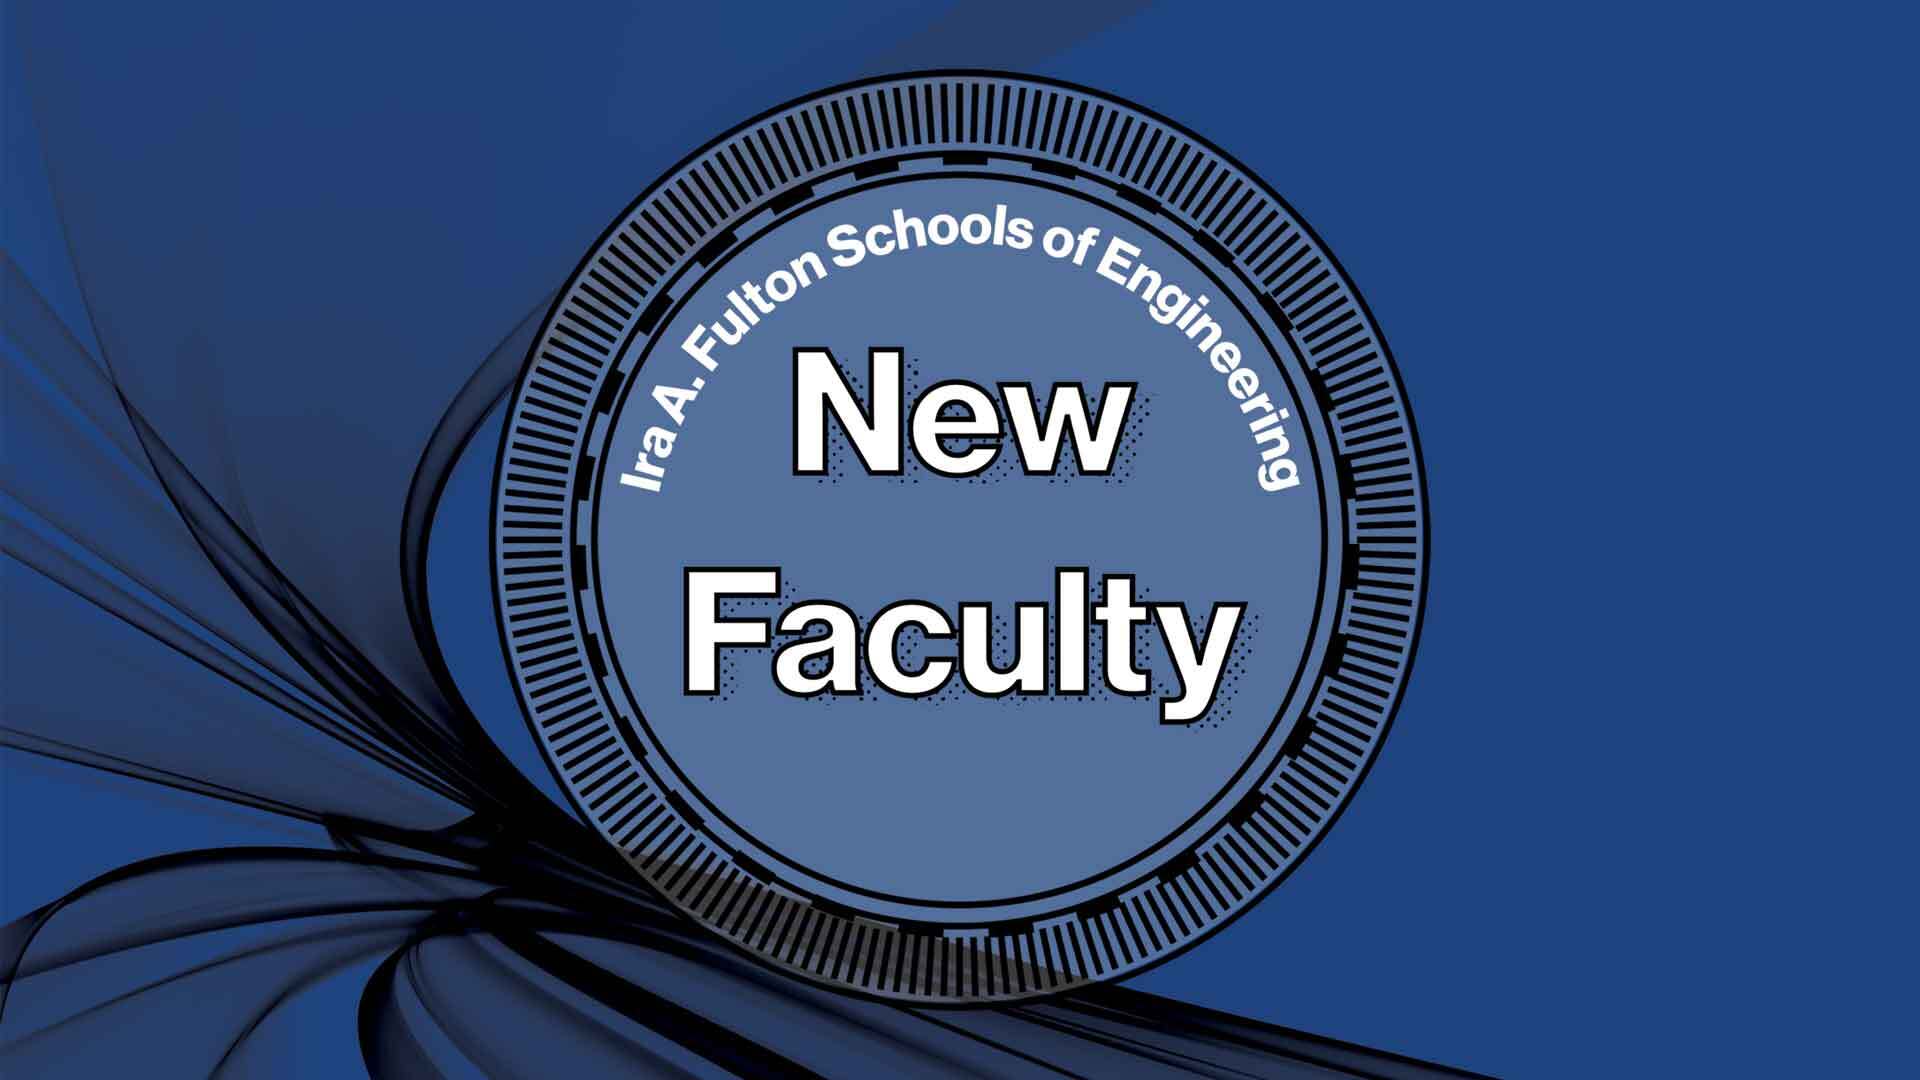 New Faculty stamp